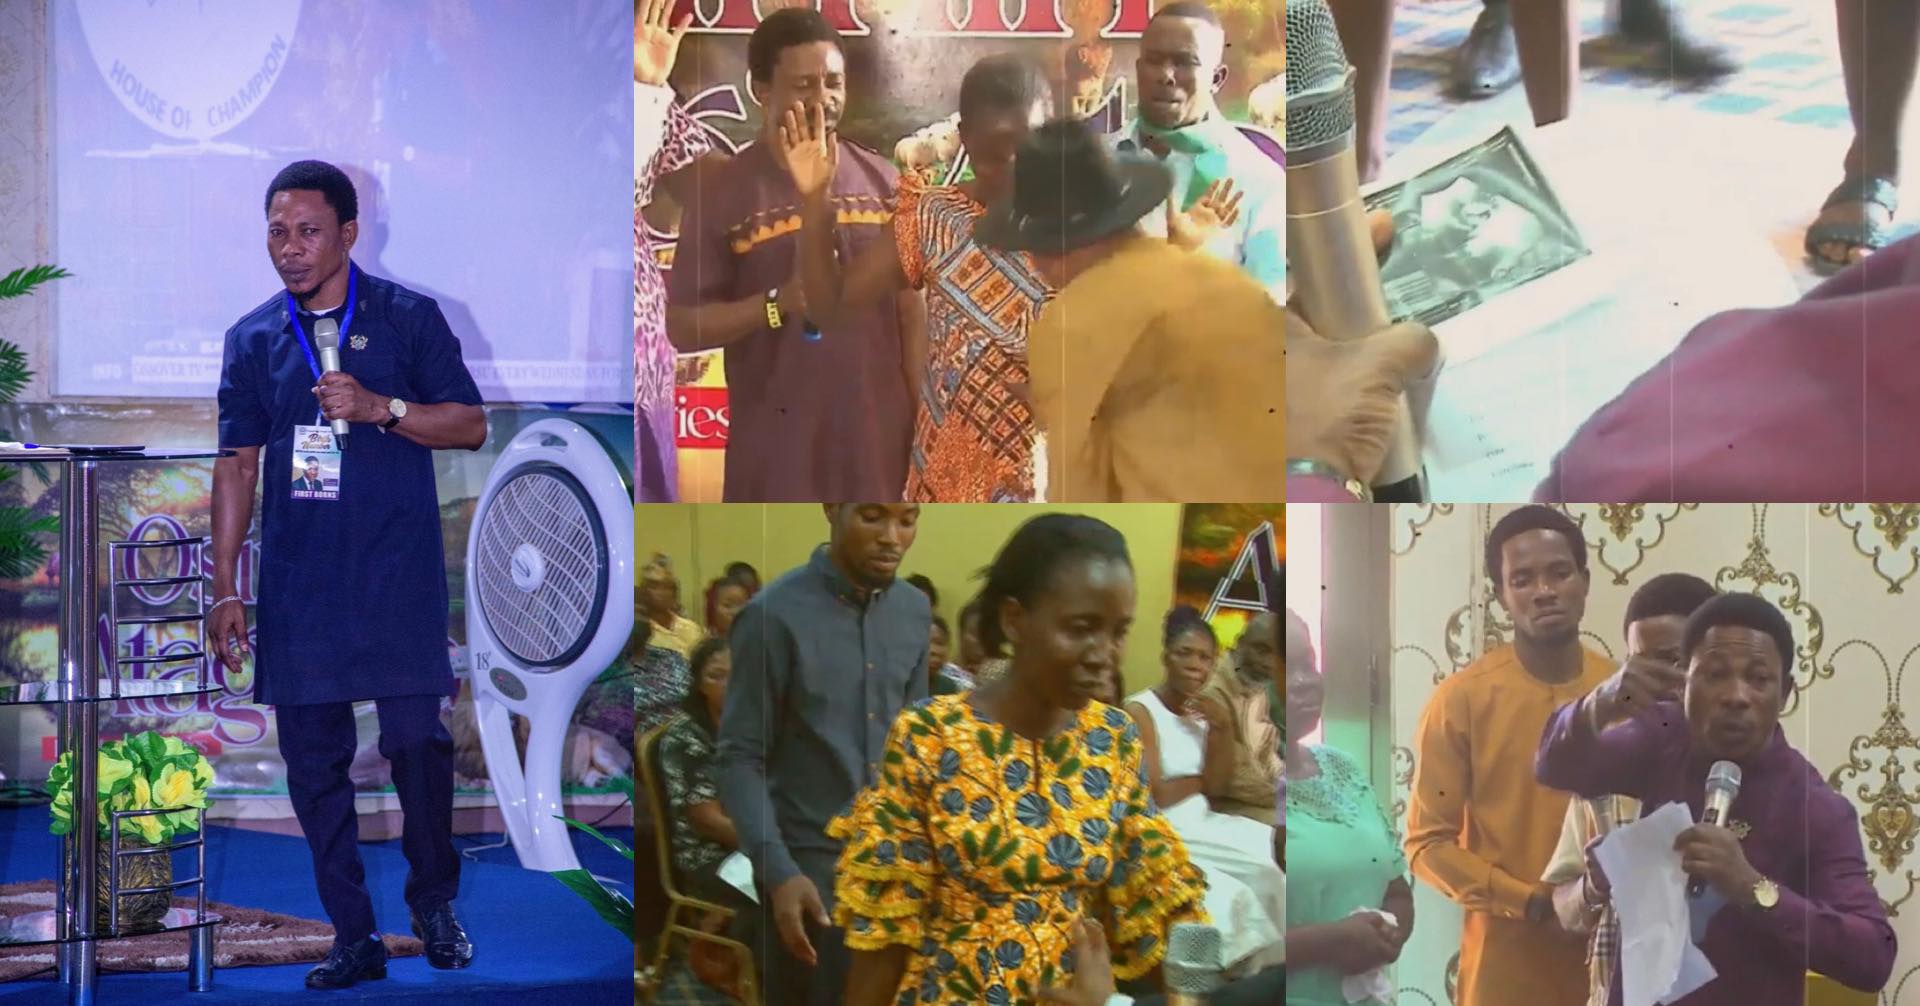 Woman Who Has Been Pregnant For 3 Years Saved By Powerful Ghanaian Prophet (Video)